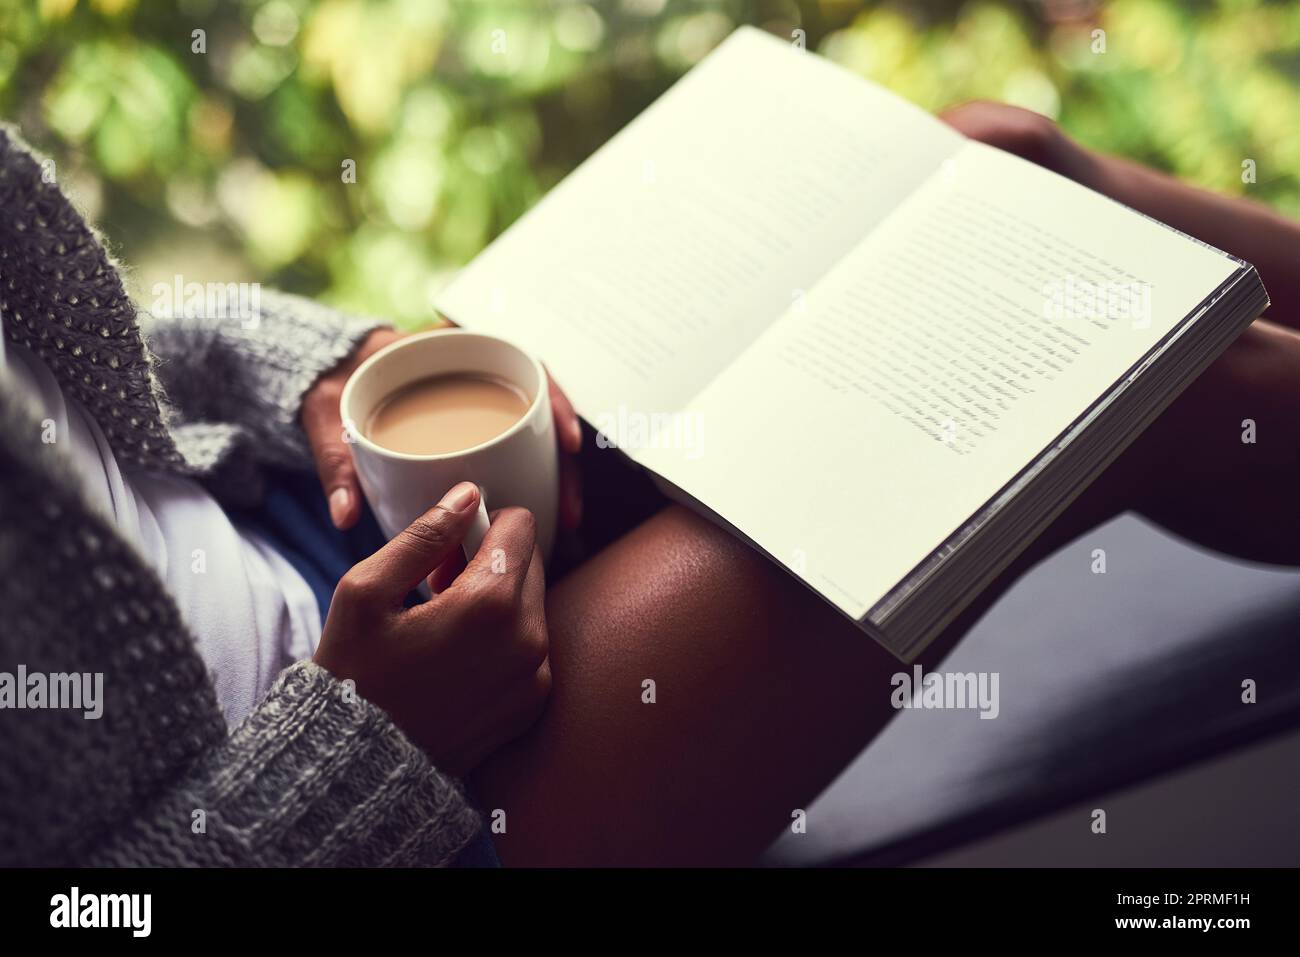 Getting stuck in her favourite book. an unidentifiable young woman reading a book while enjoying a cup of coffee at home. Stock Photo